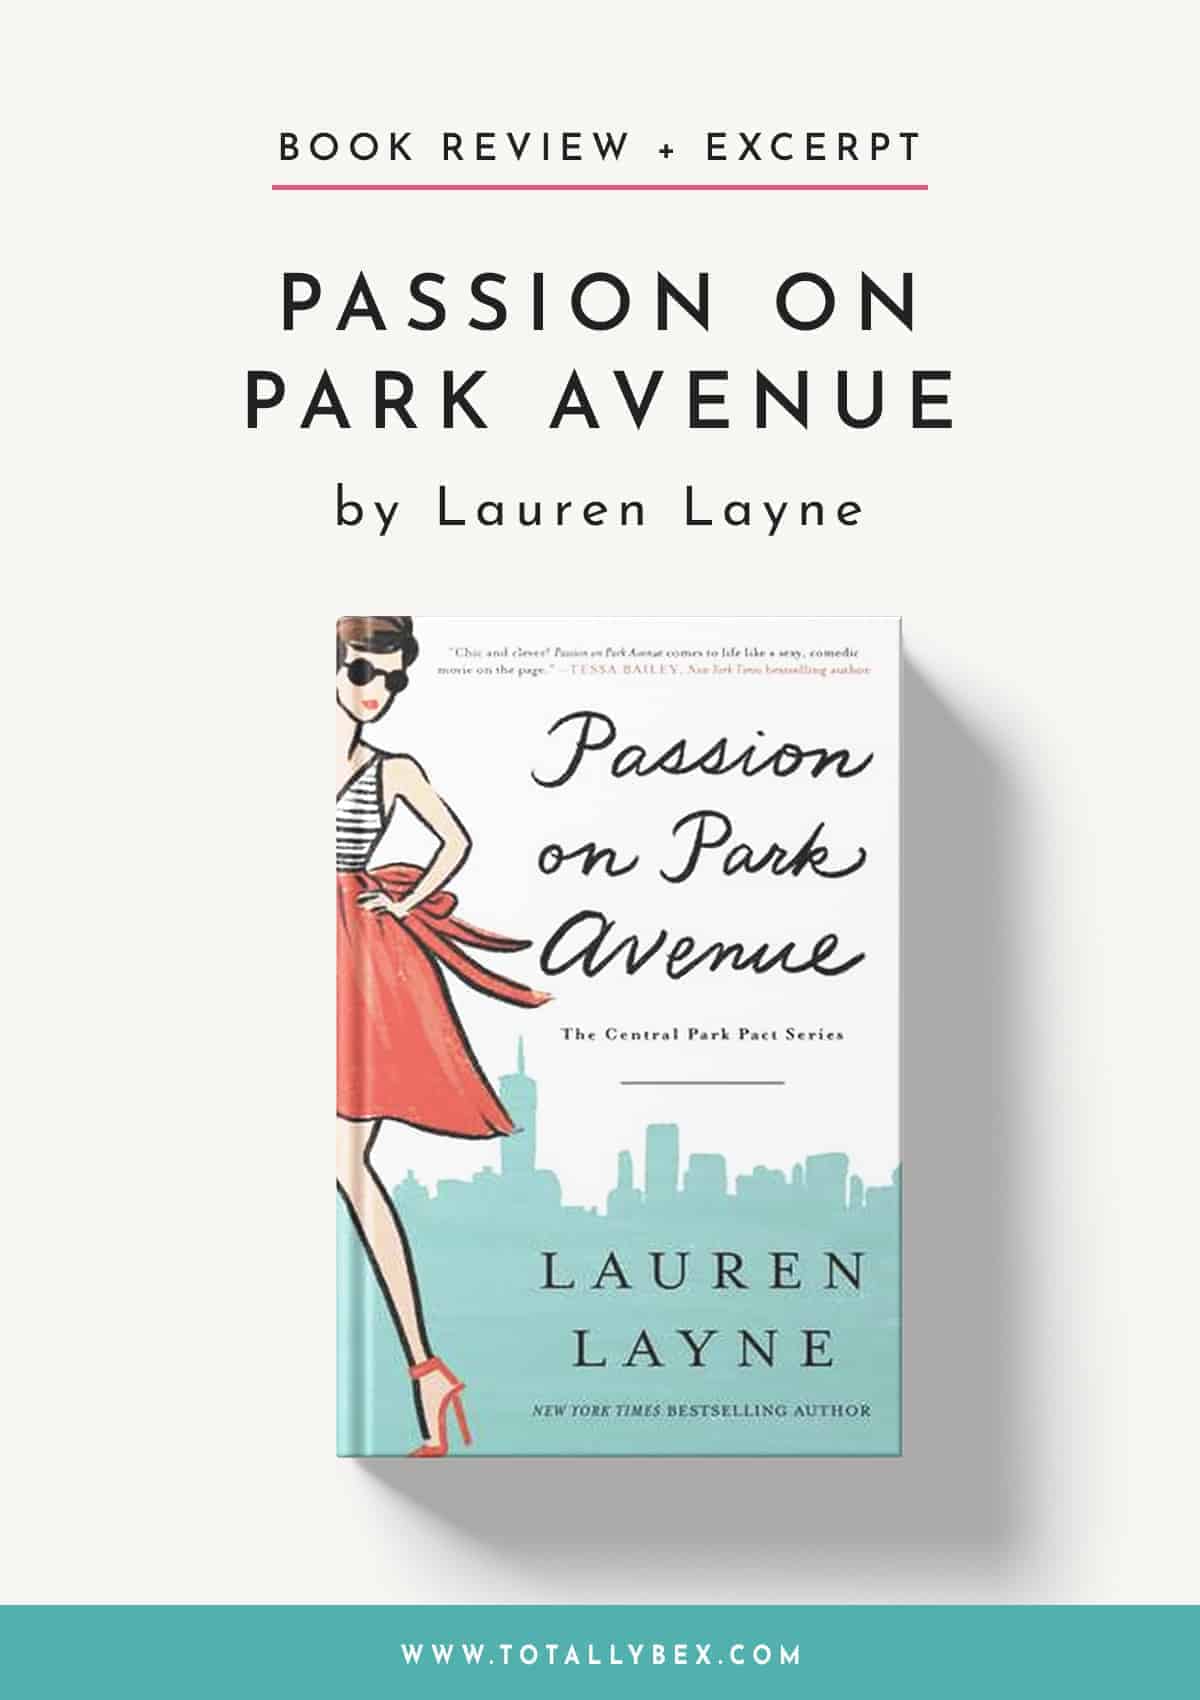 Passion on Park Avenue by Lauren Layne-Book Review+Excerpt